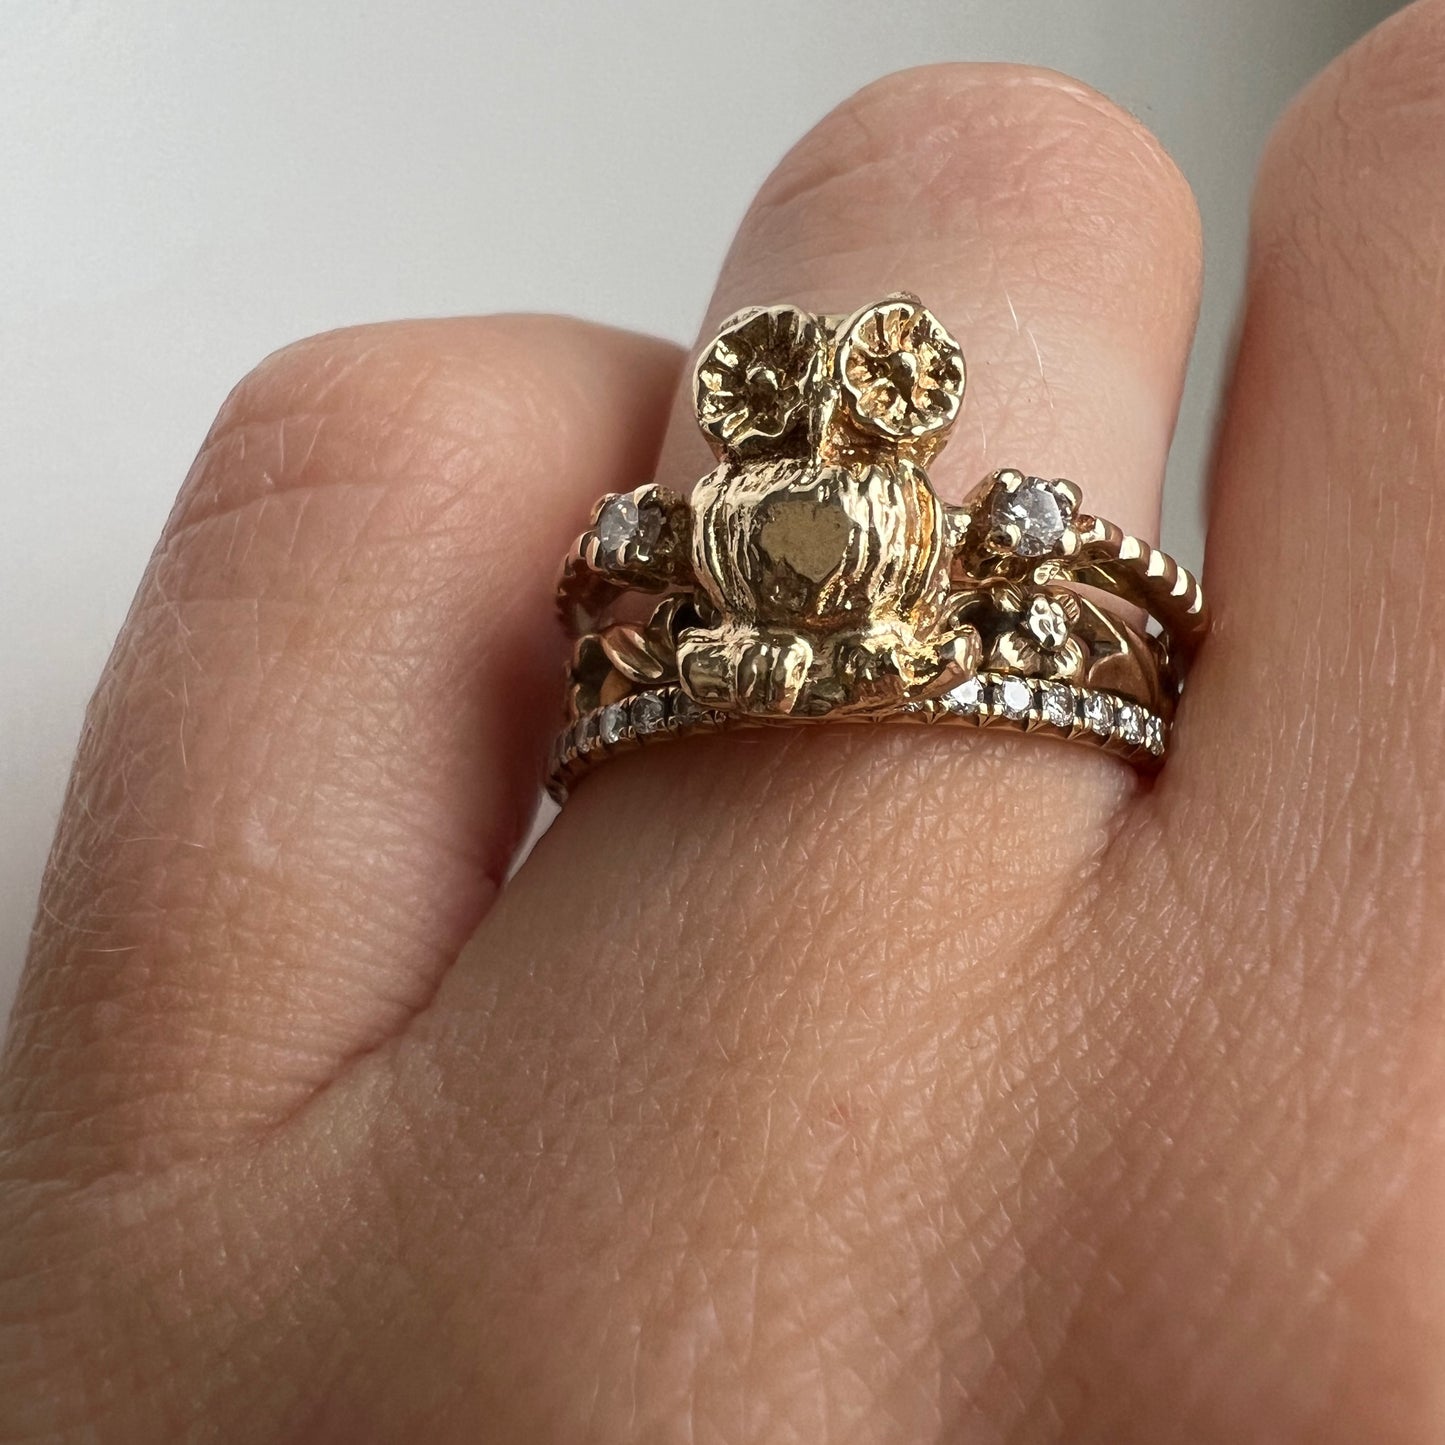 reimagined V I N T A G E // stackable bird / 14k and diamond owl conversion ring / size 7